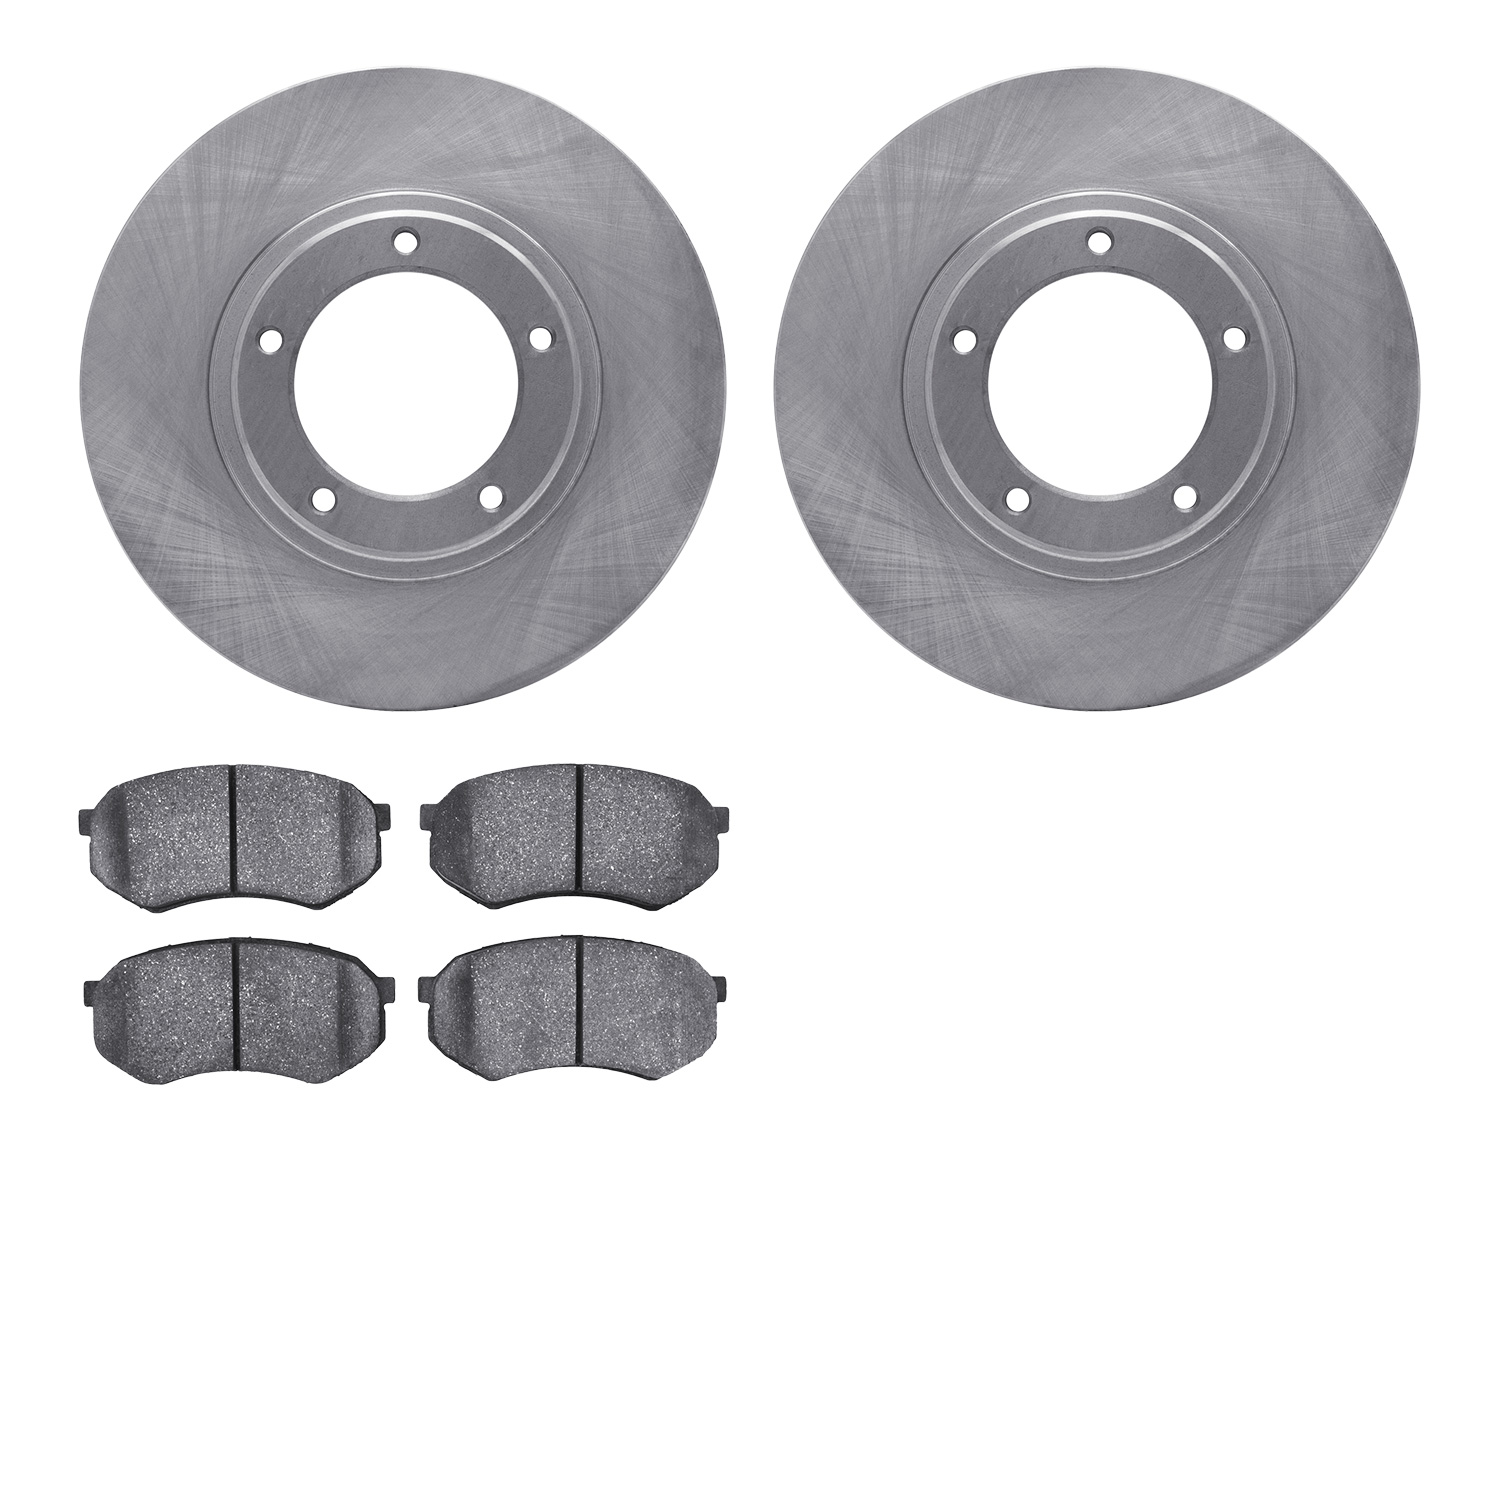 6402-76031 Brake Rotors with Ultimate-Duty Brake Pads, 1995-2004 Lexus/Toyota/Scion, Position: Front